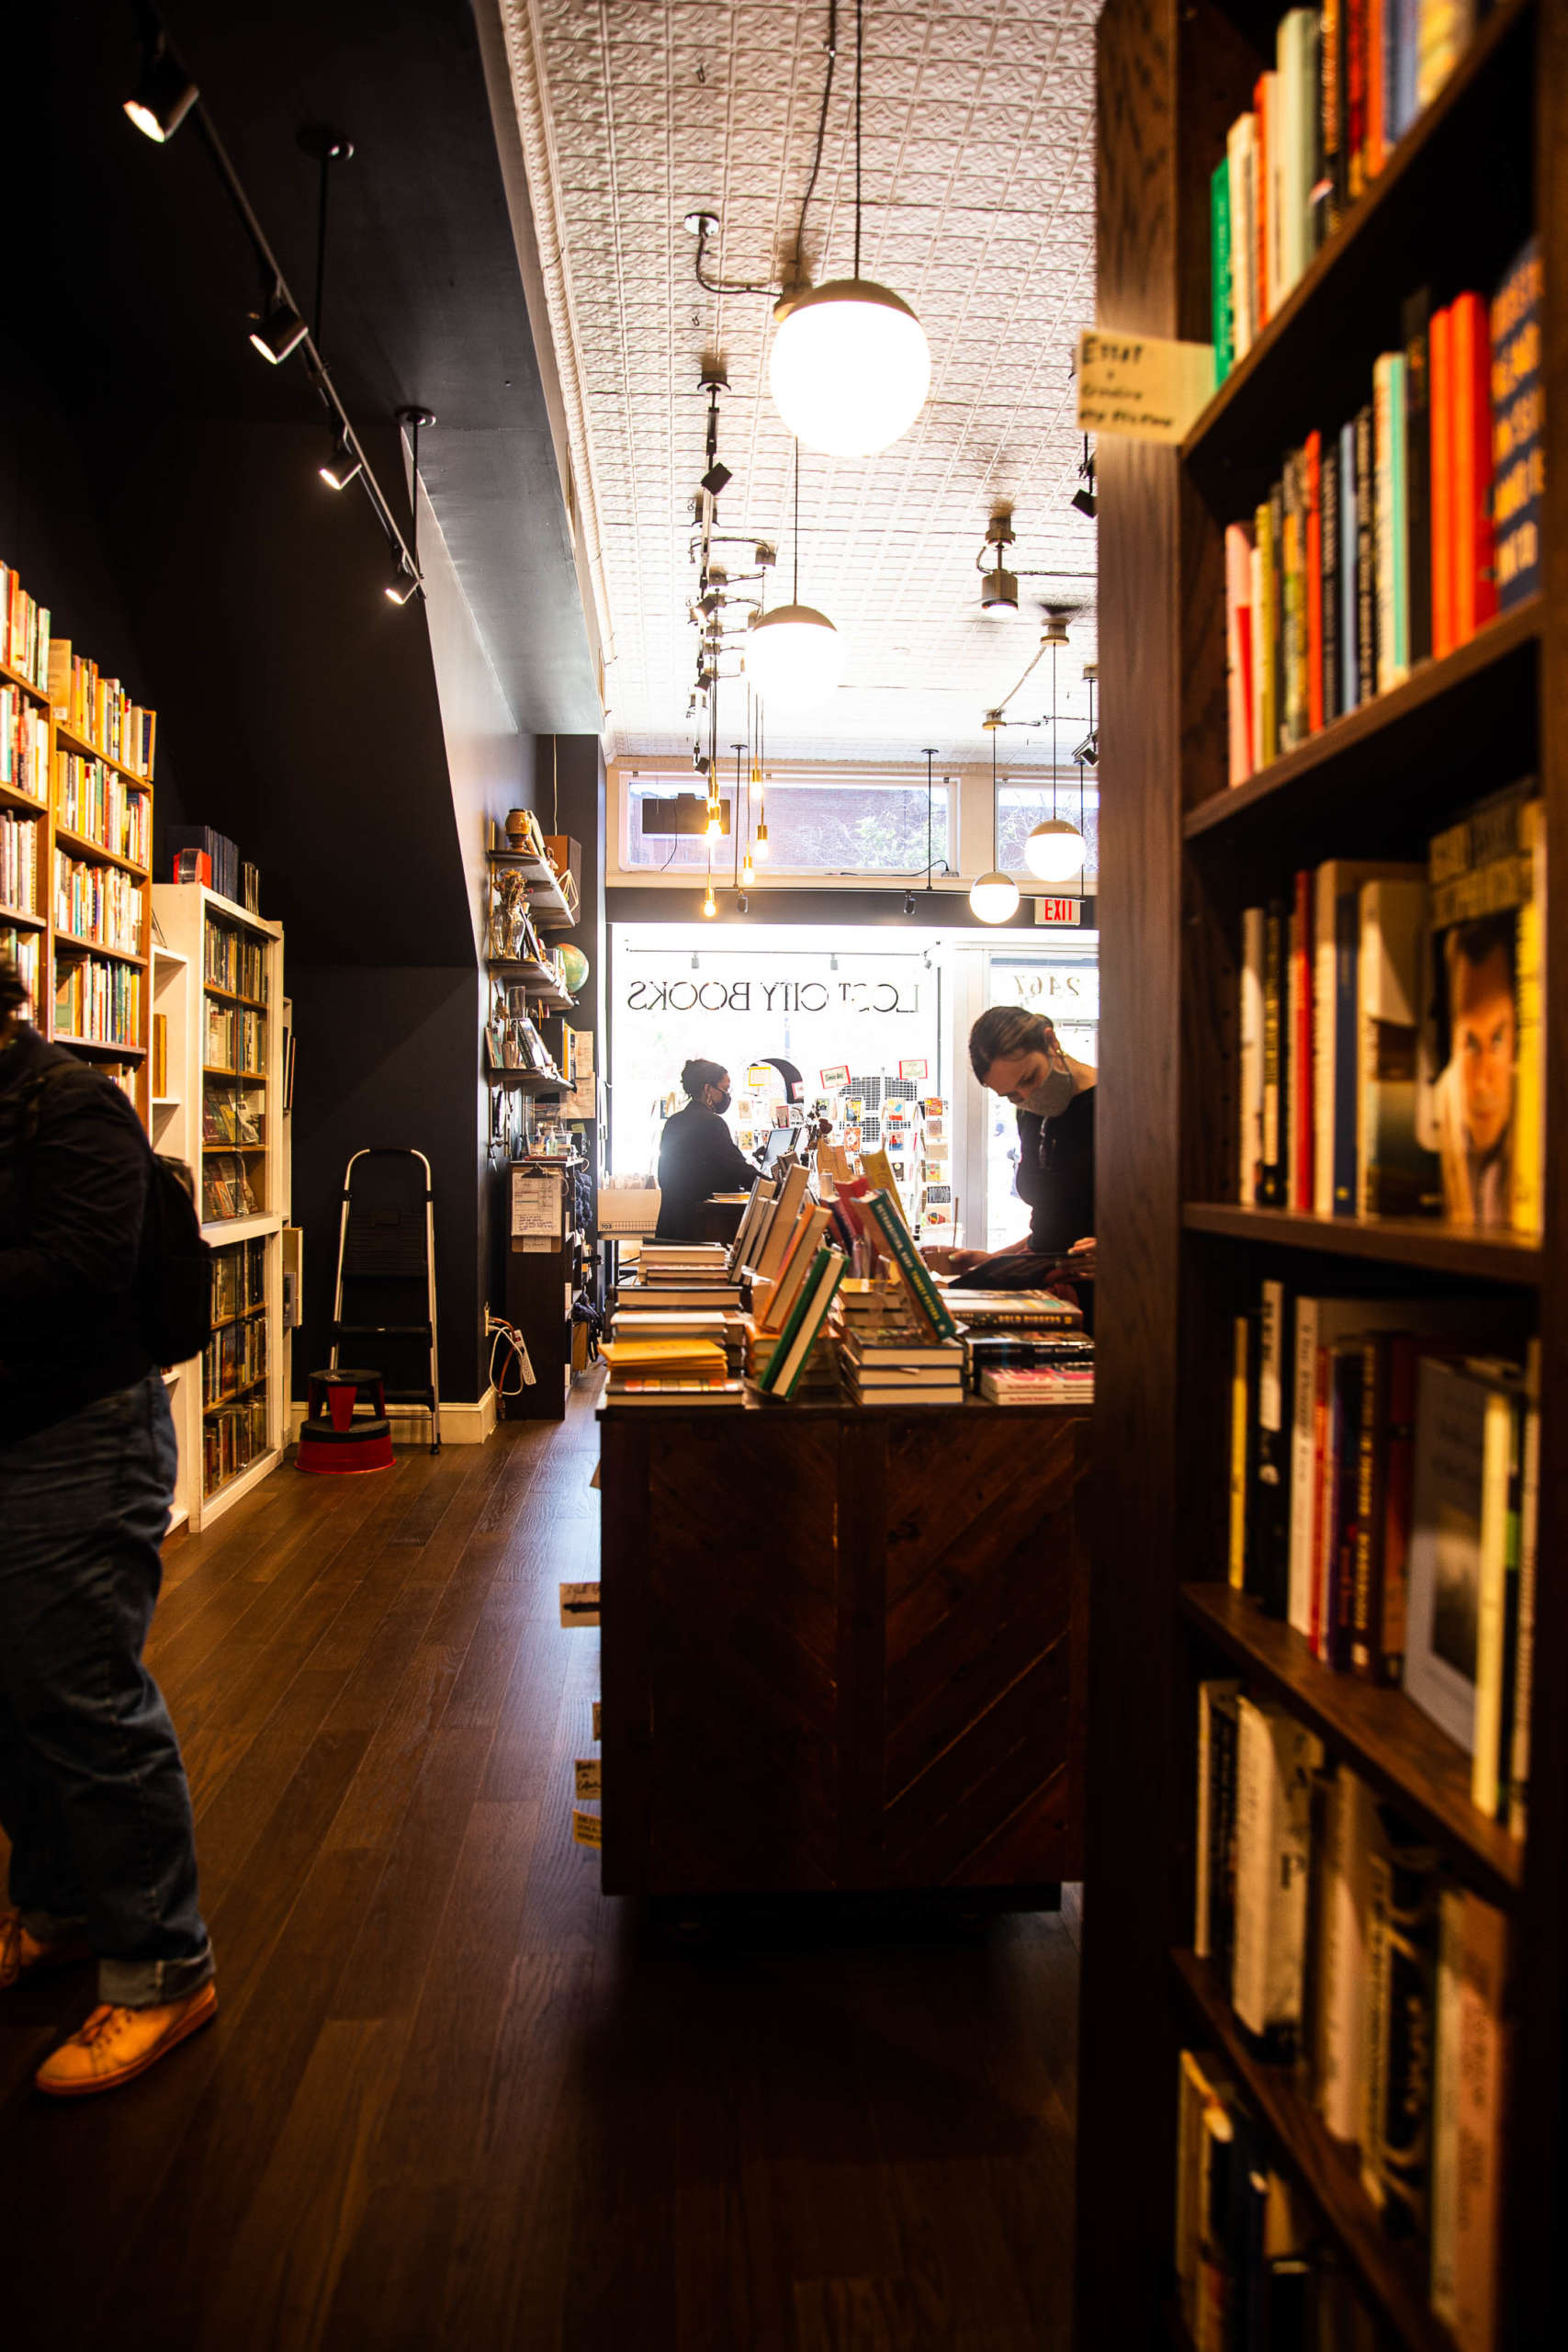 People in masks browse in a warmly-lit bookstore with wood floors and black walls. Reversed in the window is the store name "Lost City Books".